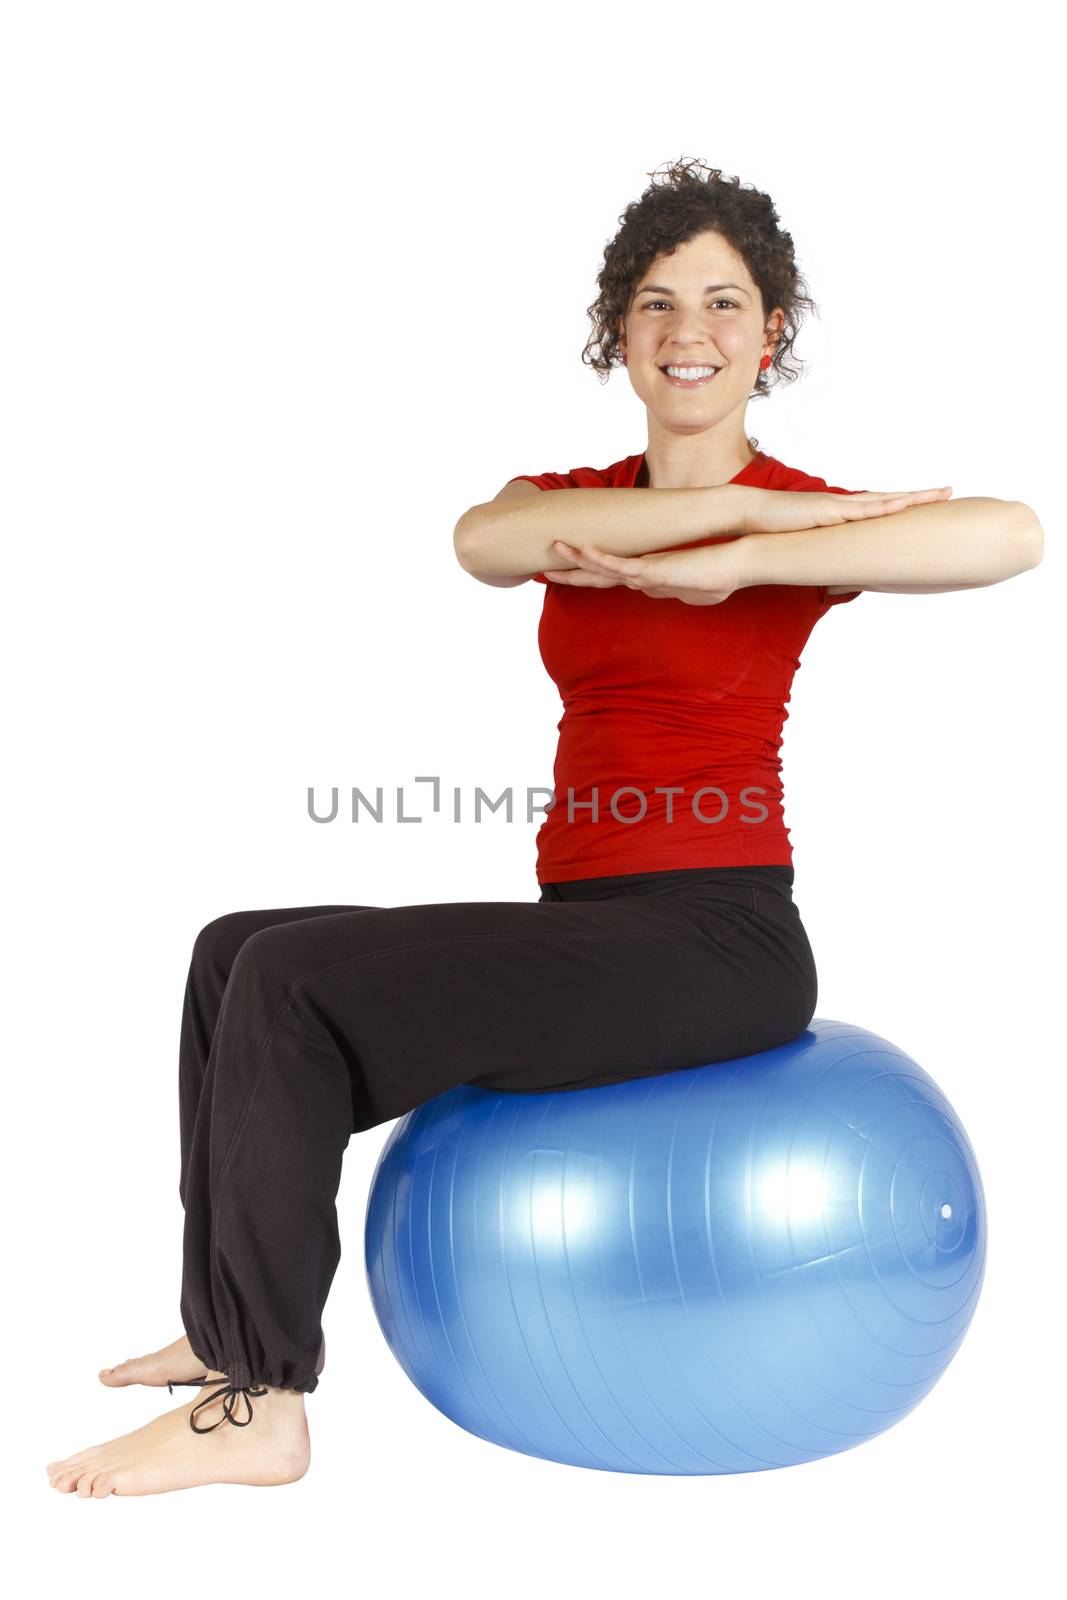 Smiling young woman sitting on a blue yoga ball doing an exercise.